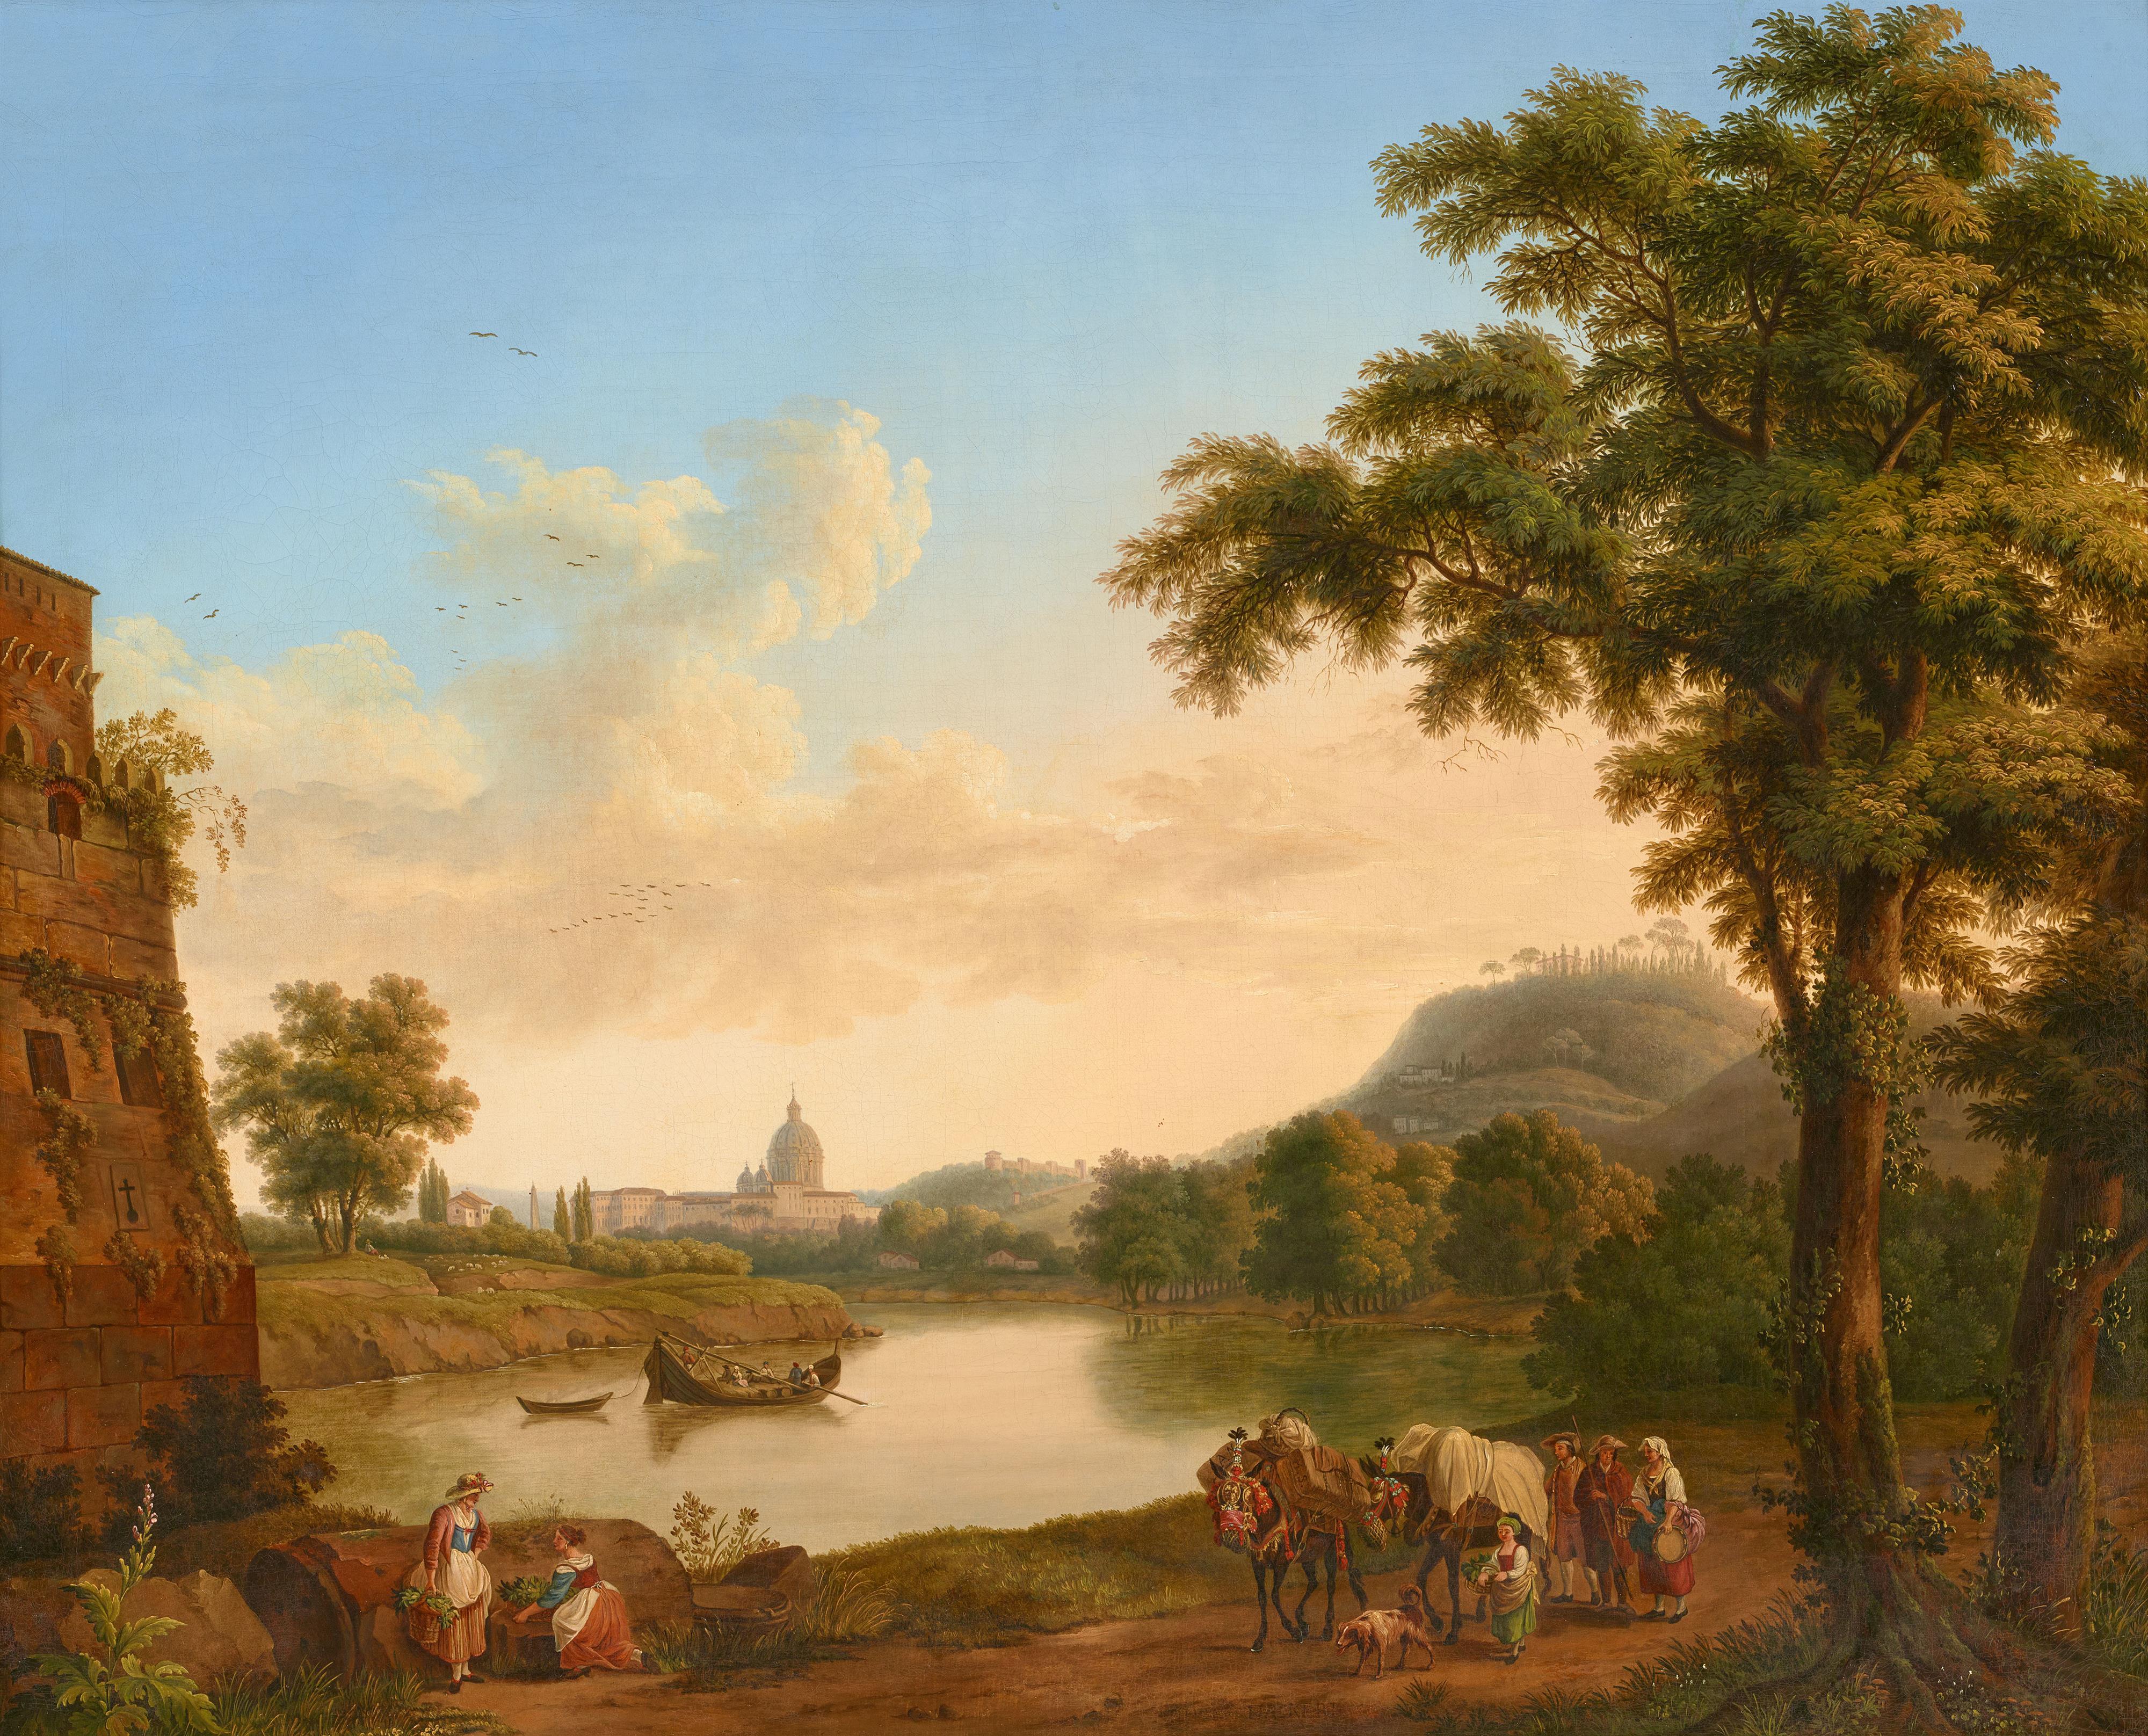 Jacob Philipp Hackert - View to the Tiber and St Peter's from Ponte Milvio - image-1